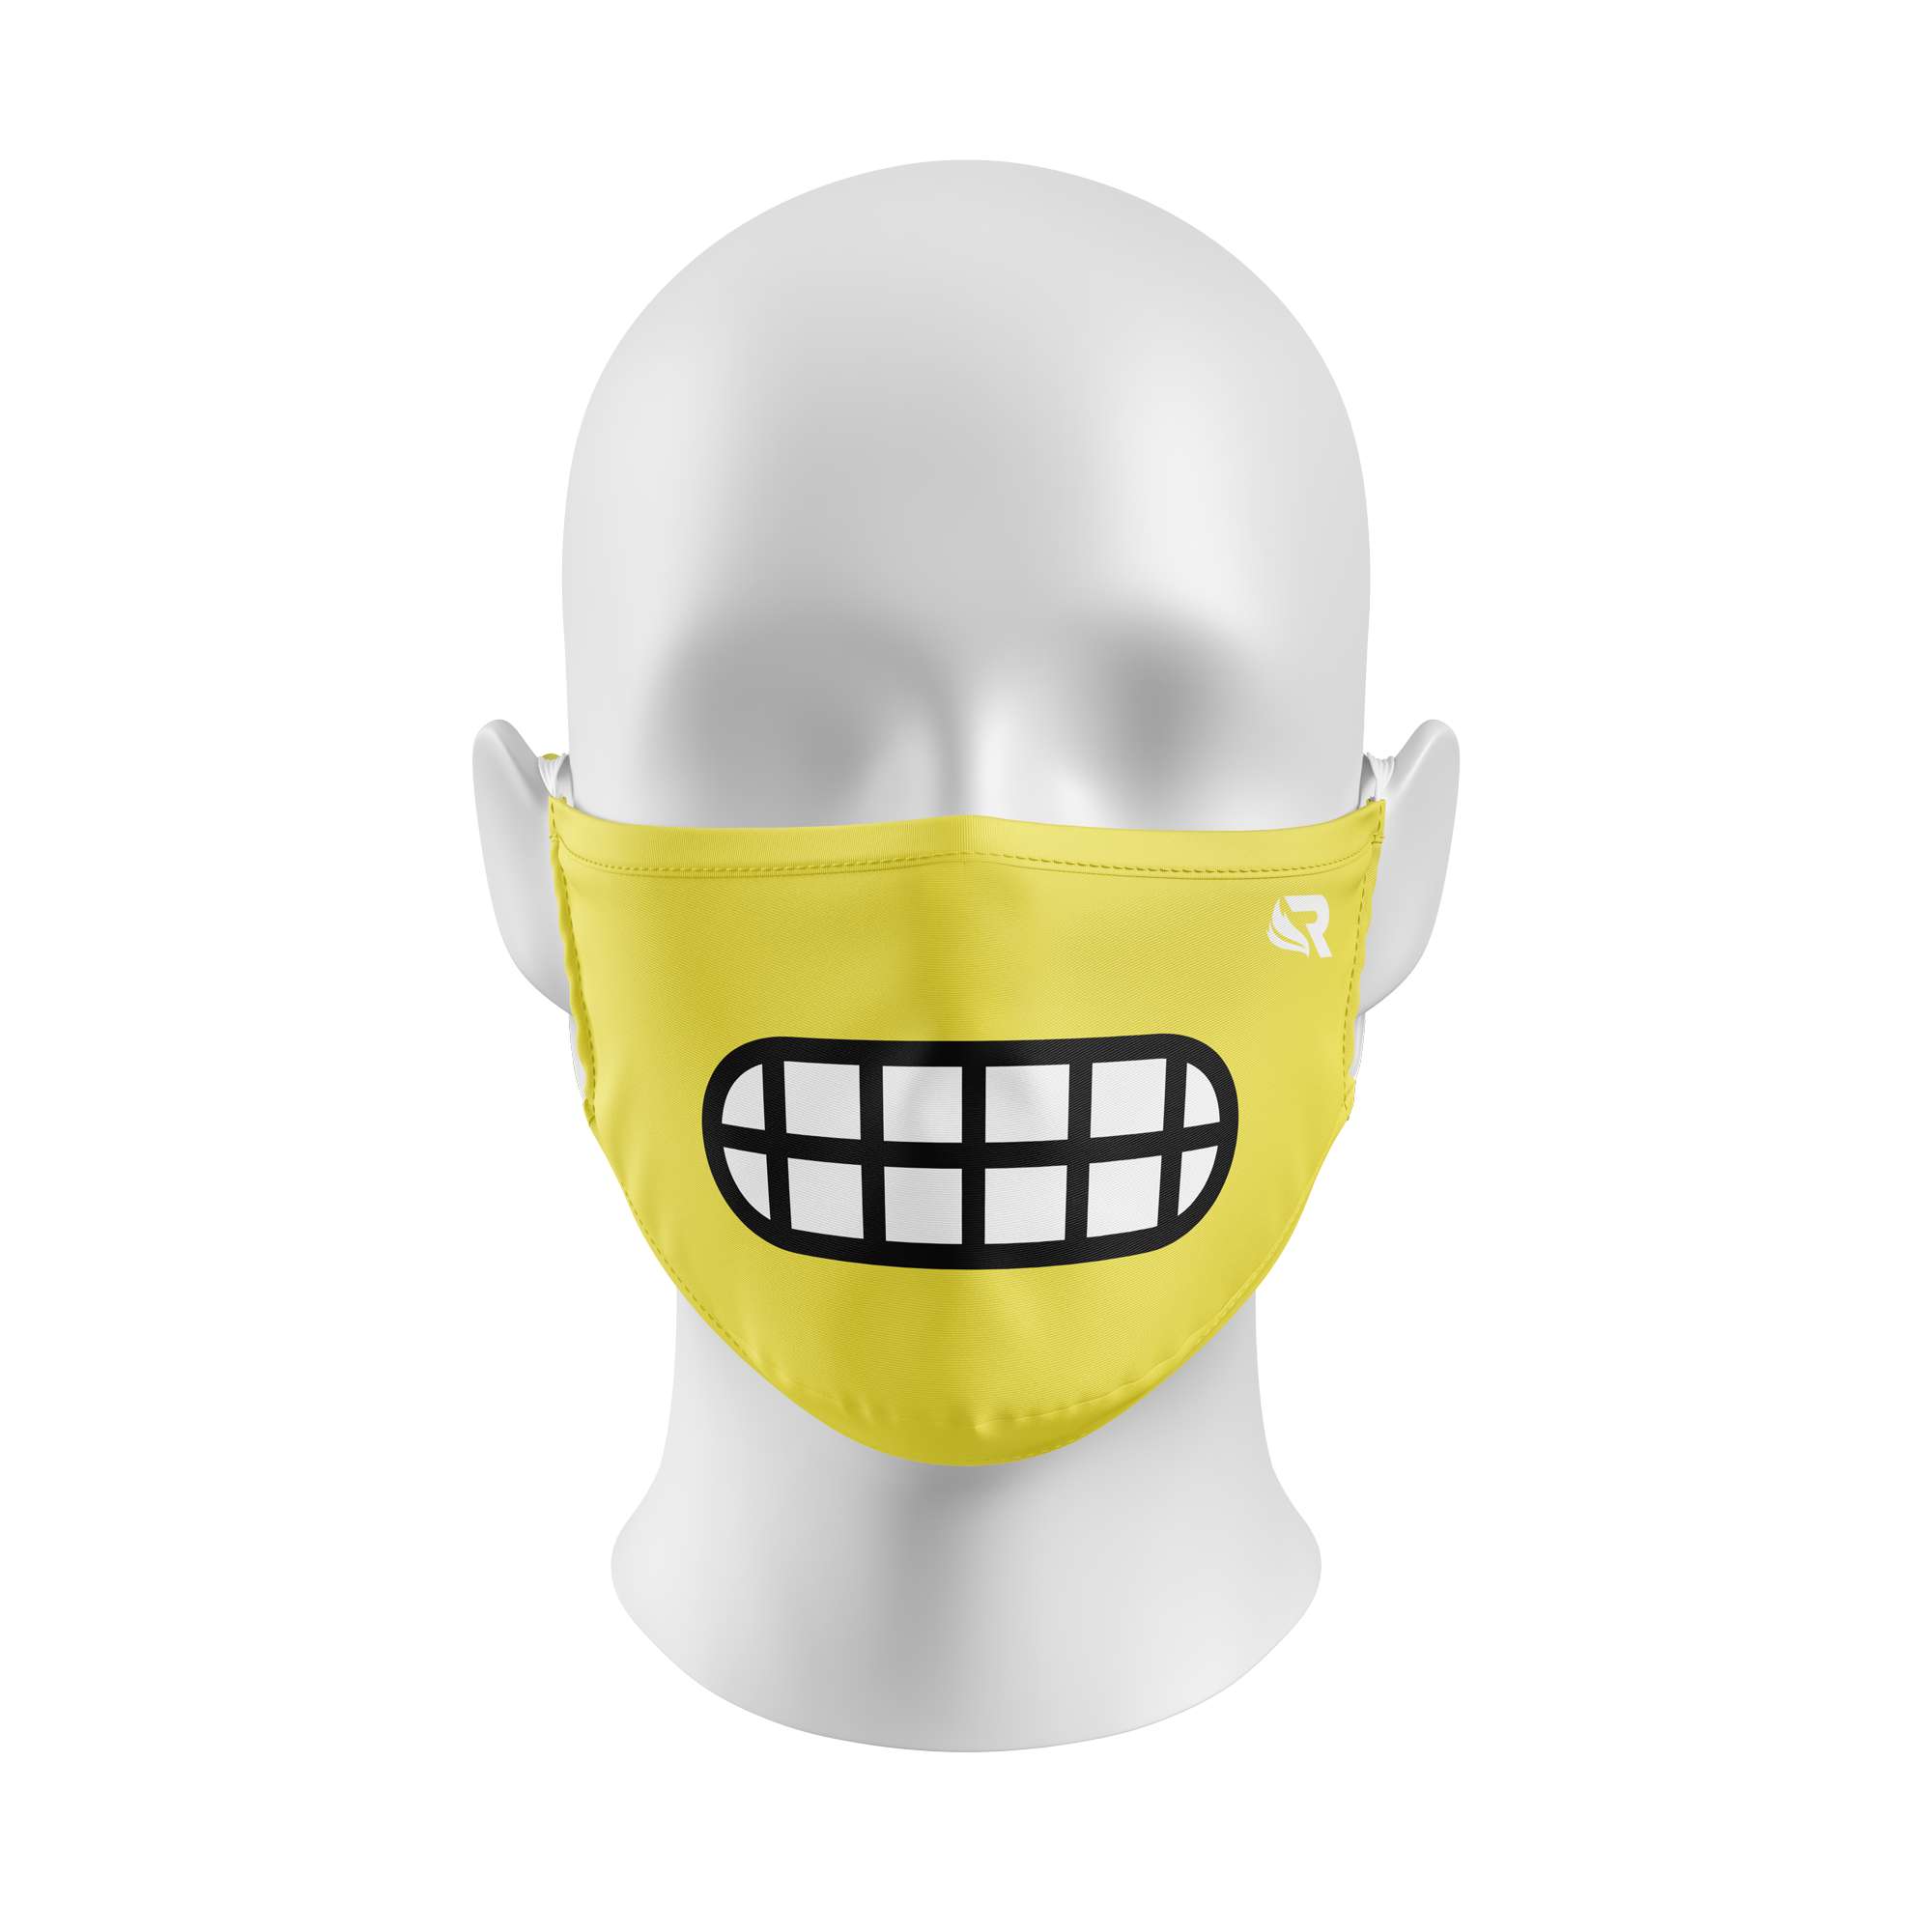 :Revivalmote: Mask Series